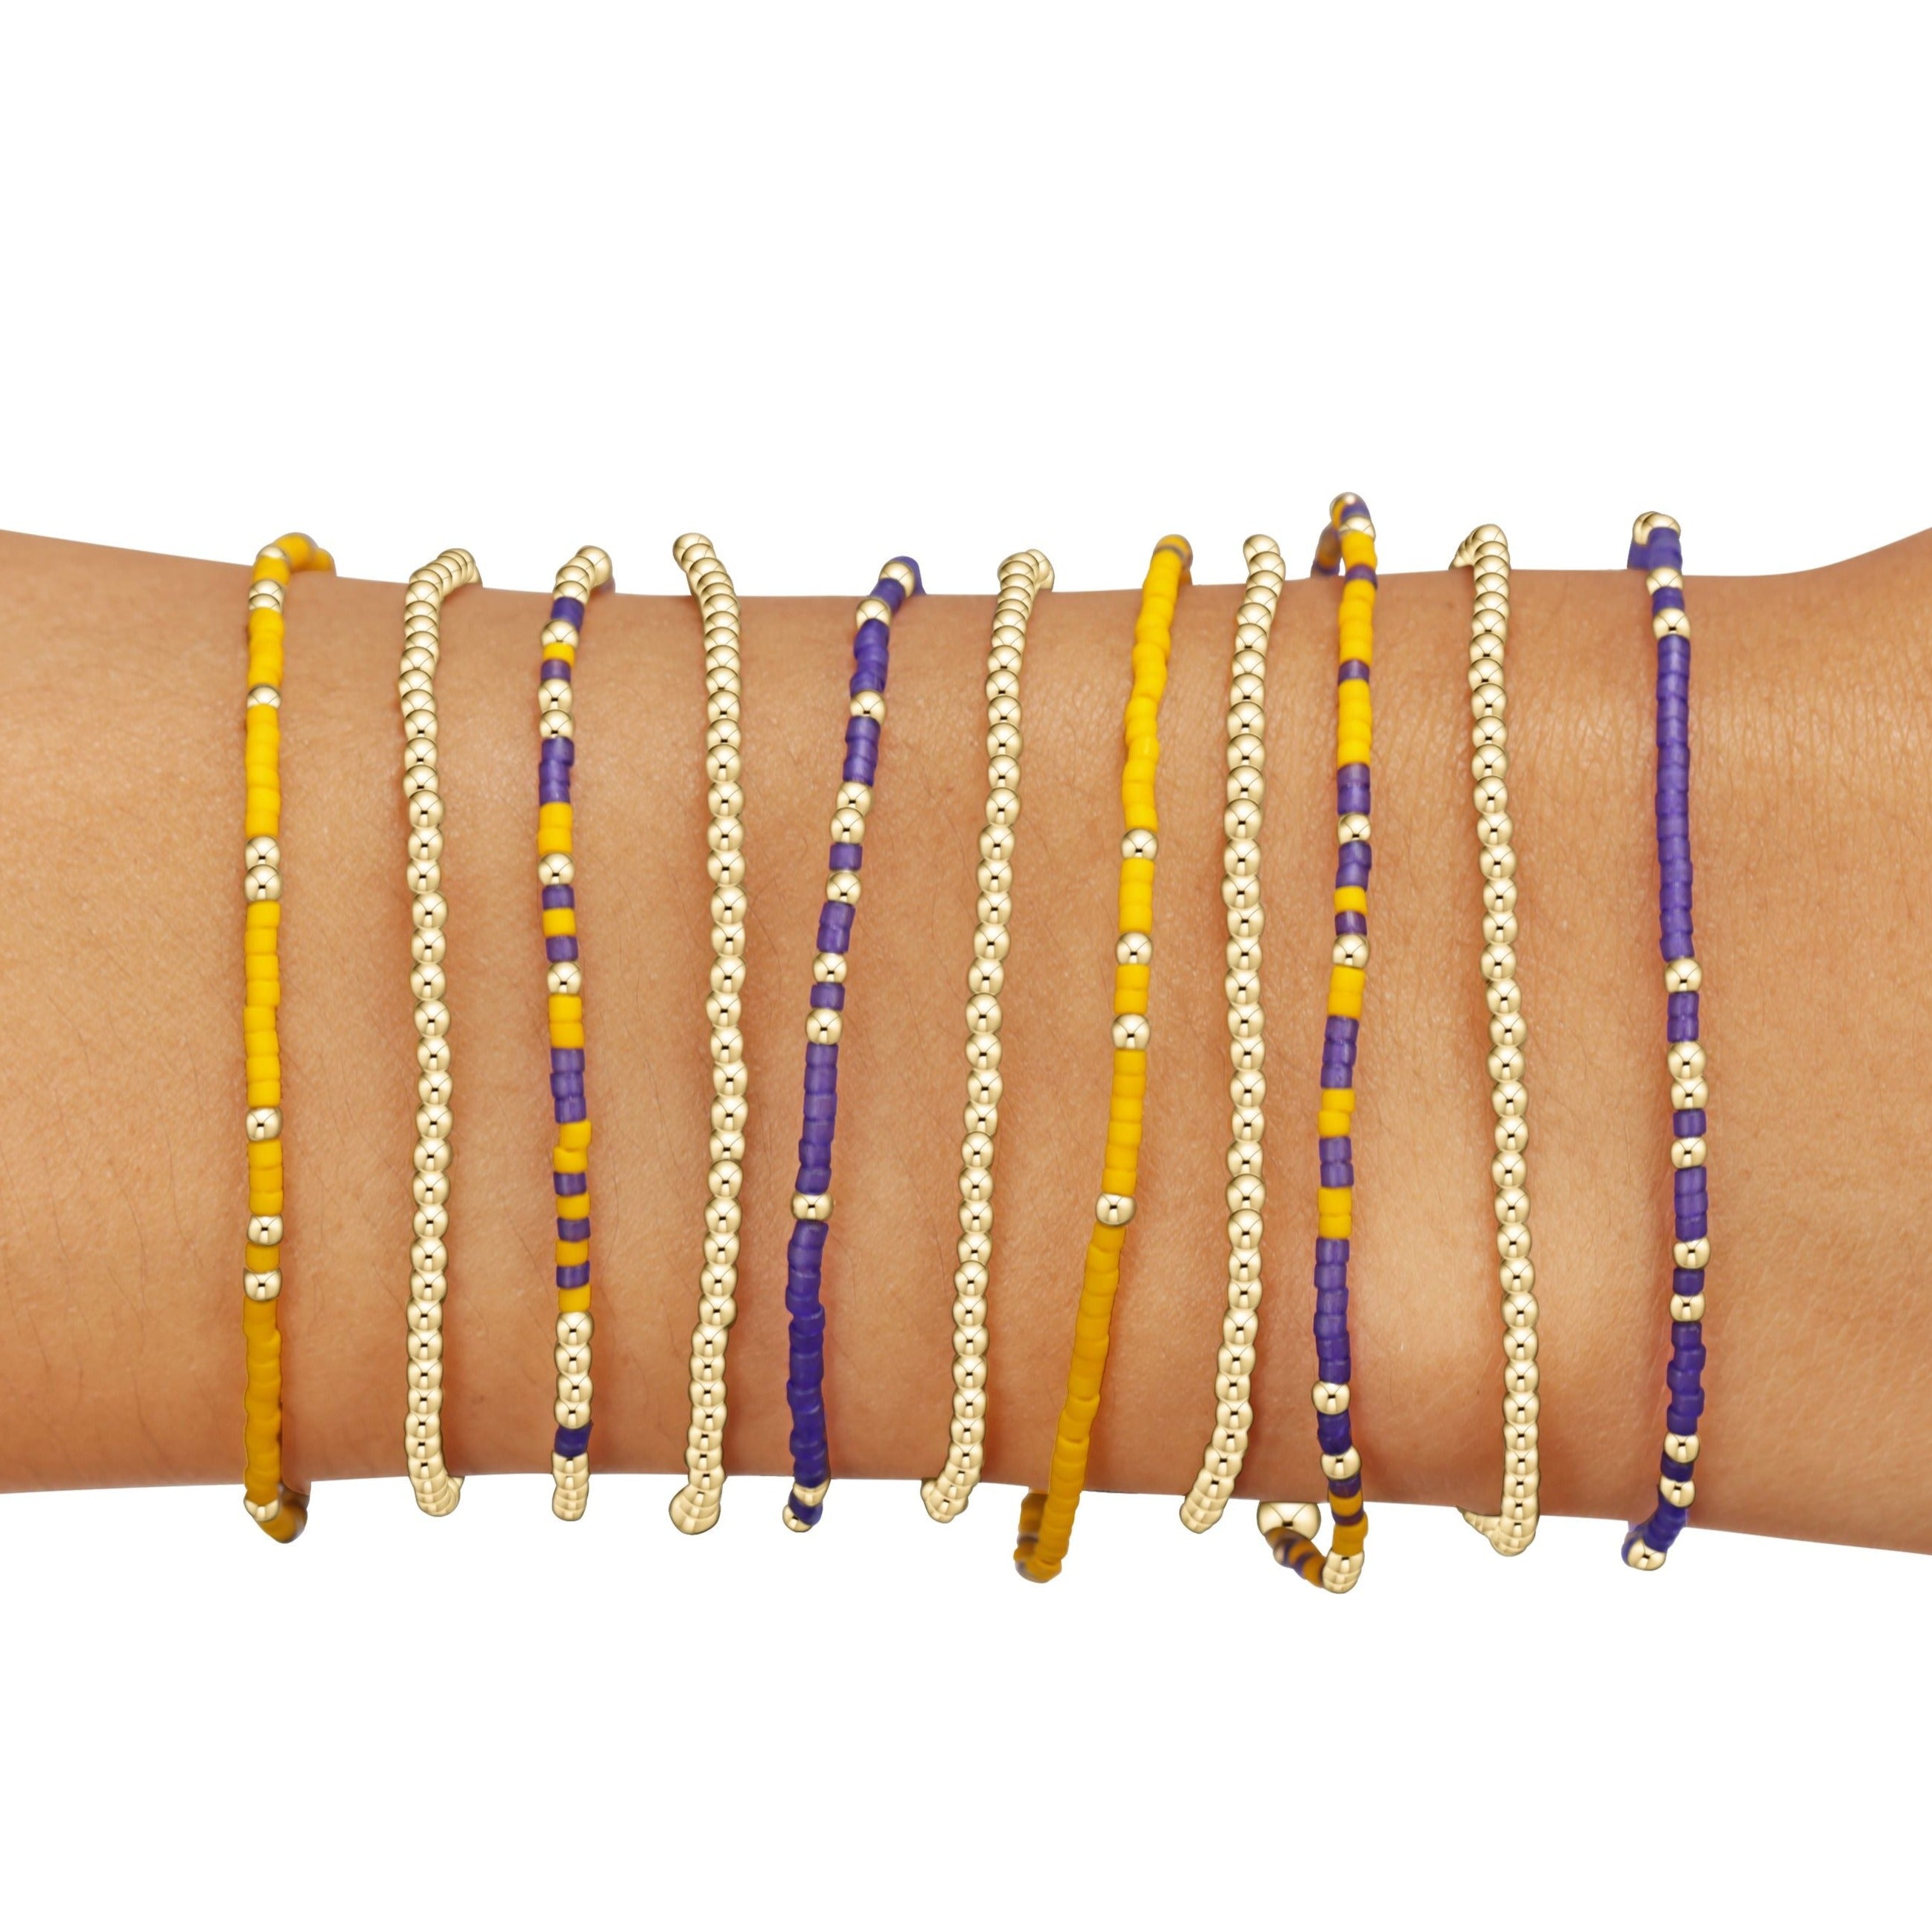 Hail Mary Gameday Stack of 11 - Deep Purple-Golden Yellow